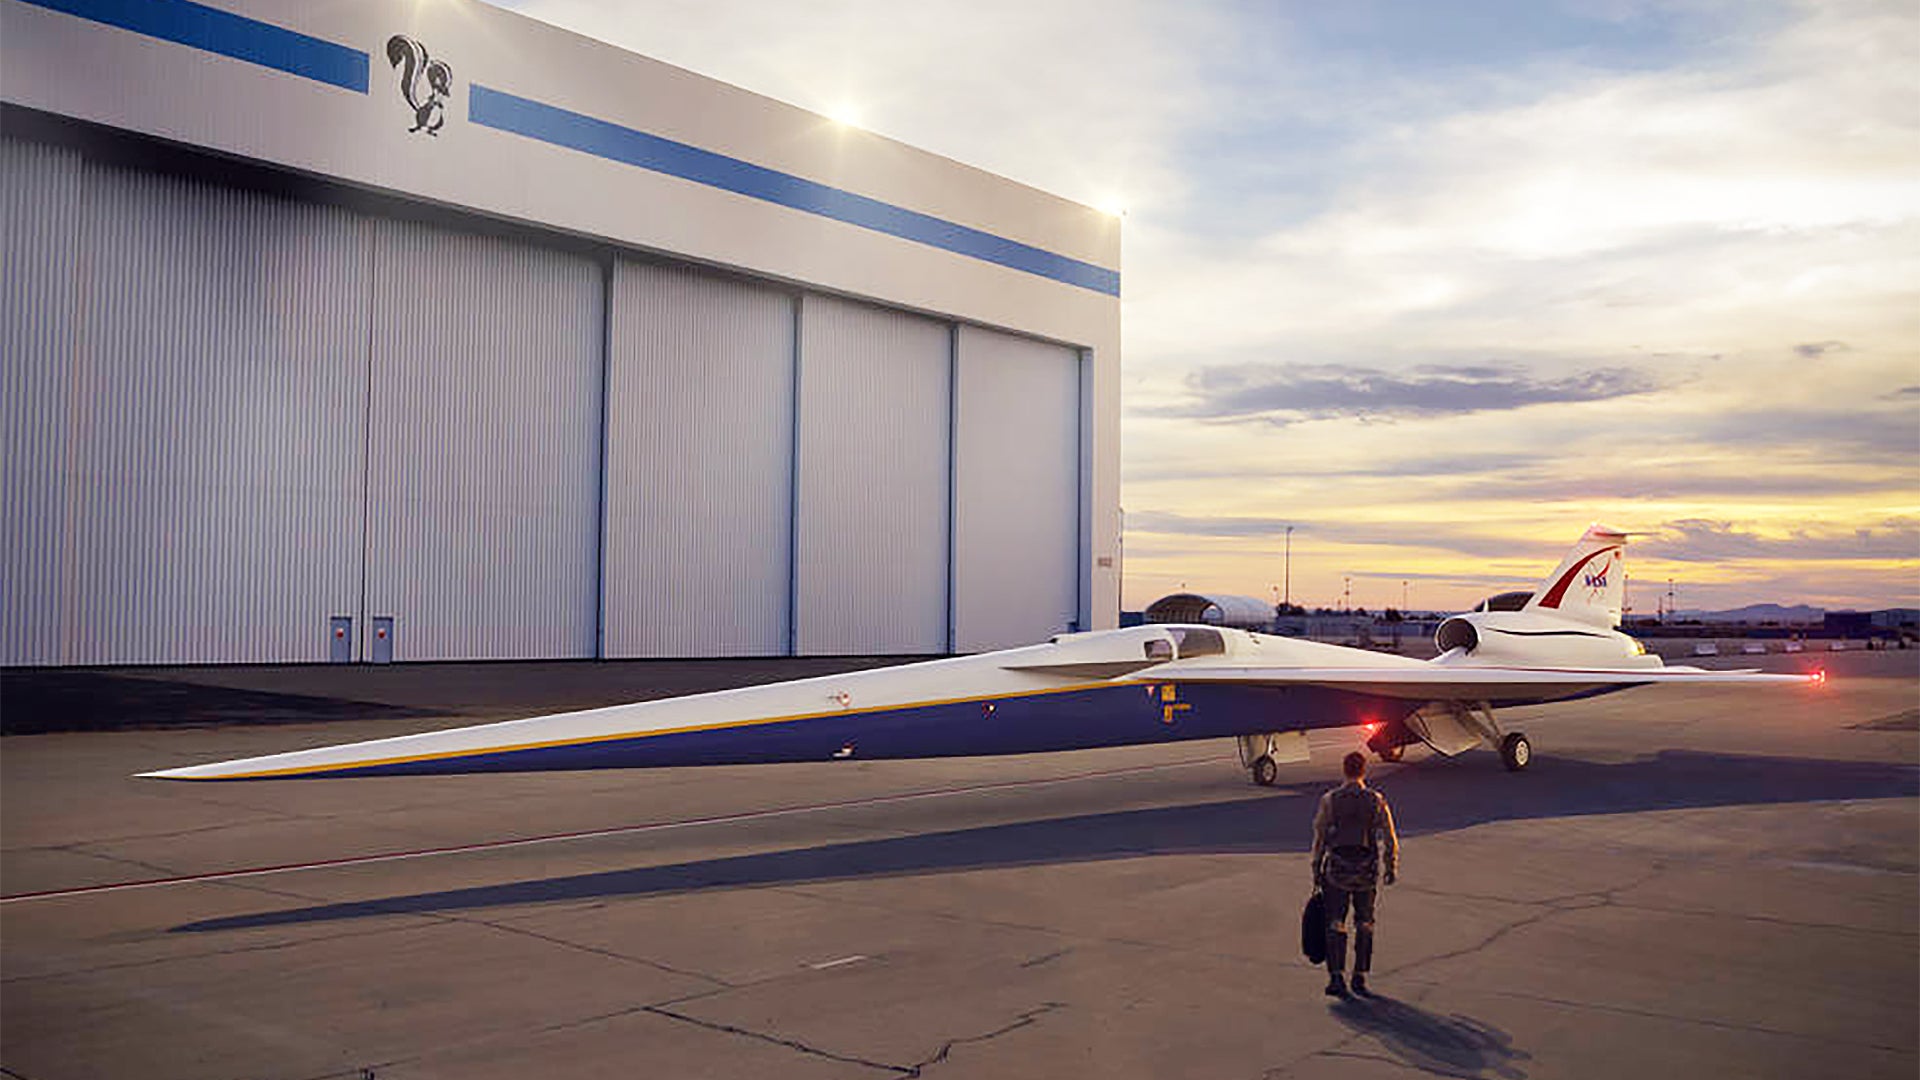 NASA Awards Contract To Lockheed’s Skunk Works To Build Manned Quiet Supersonic X-Plane